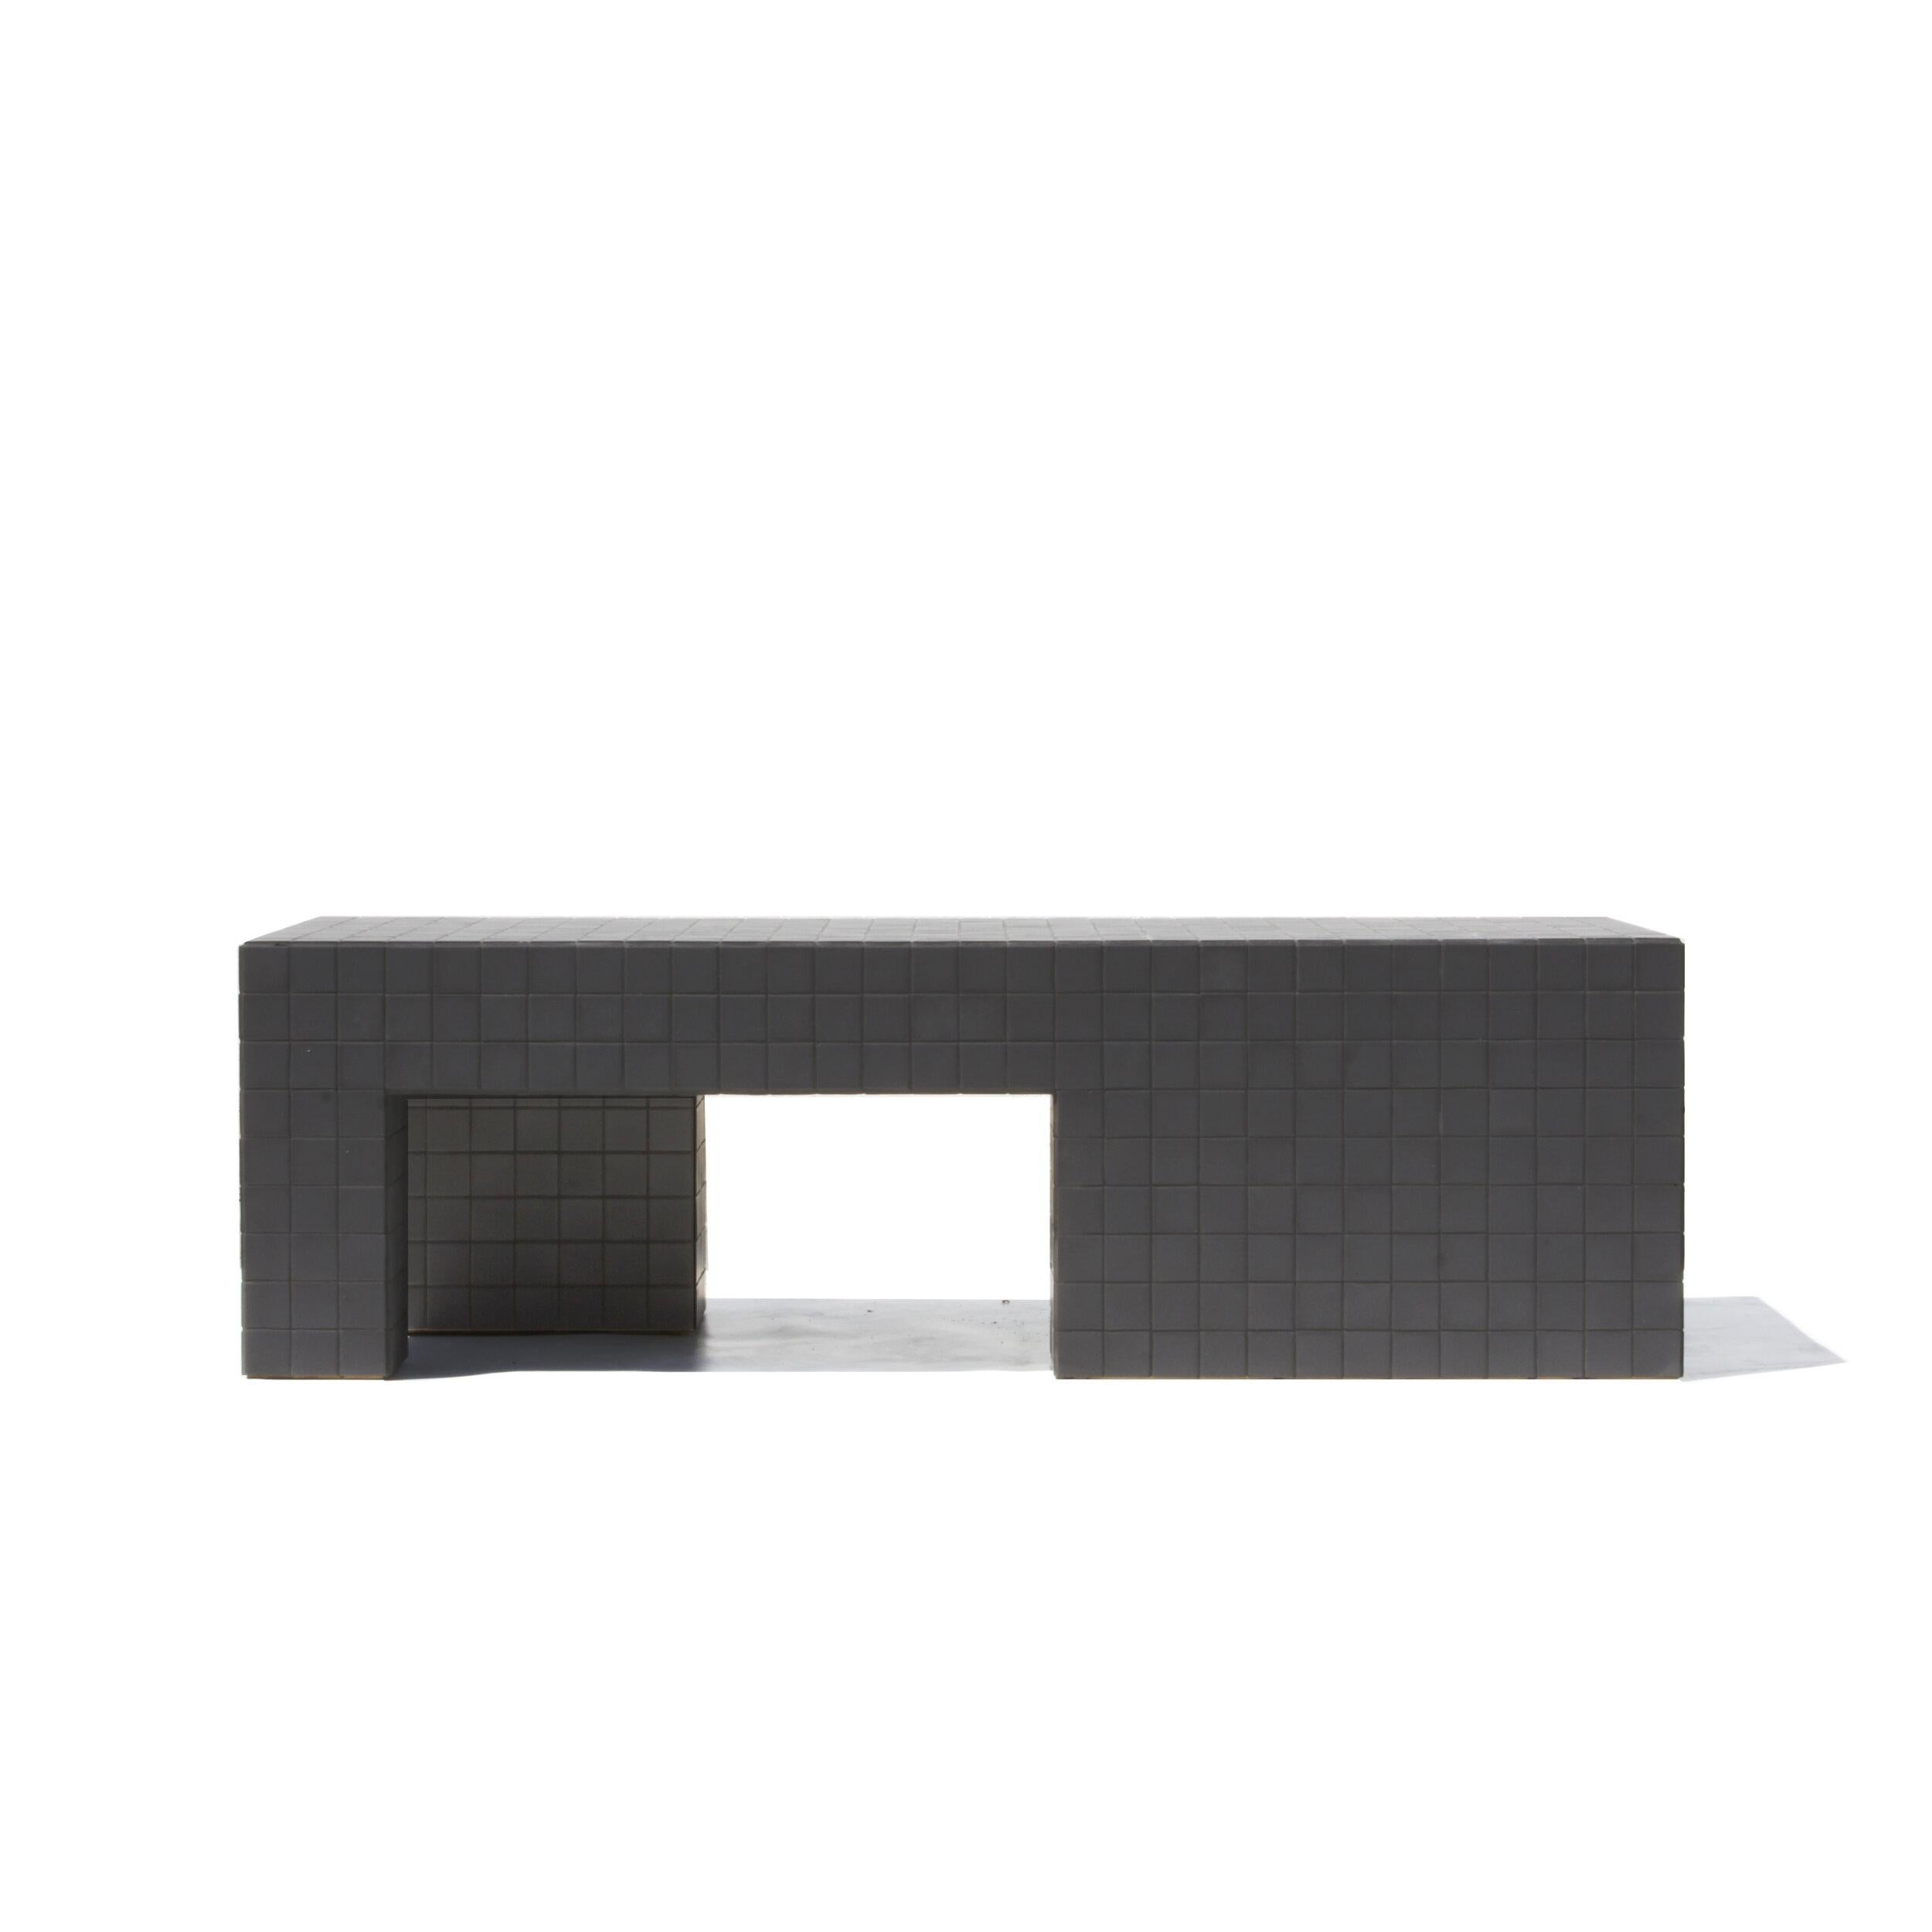 Designed and made by Nima Abili in Los Angeles this handcrafted table is cladded with black matte porcelain tiles and sanded black grout. Inspired by Brutalist style of architecture this collection offers a variety of pieces designed based on the